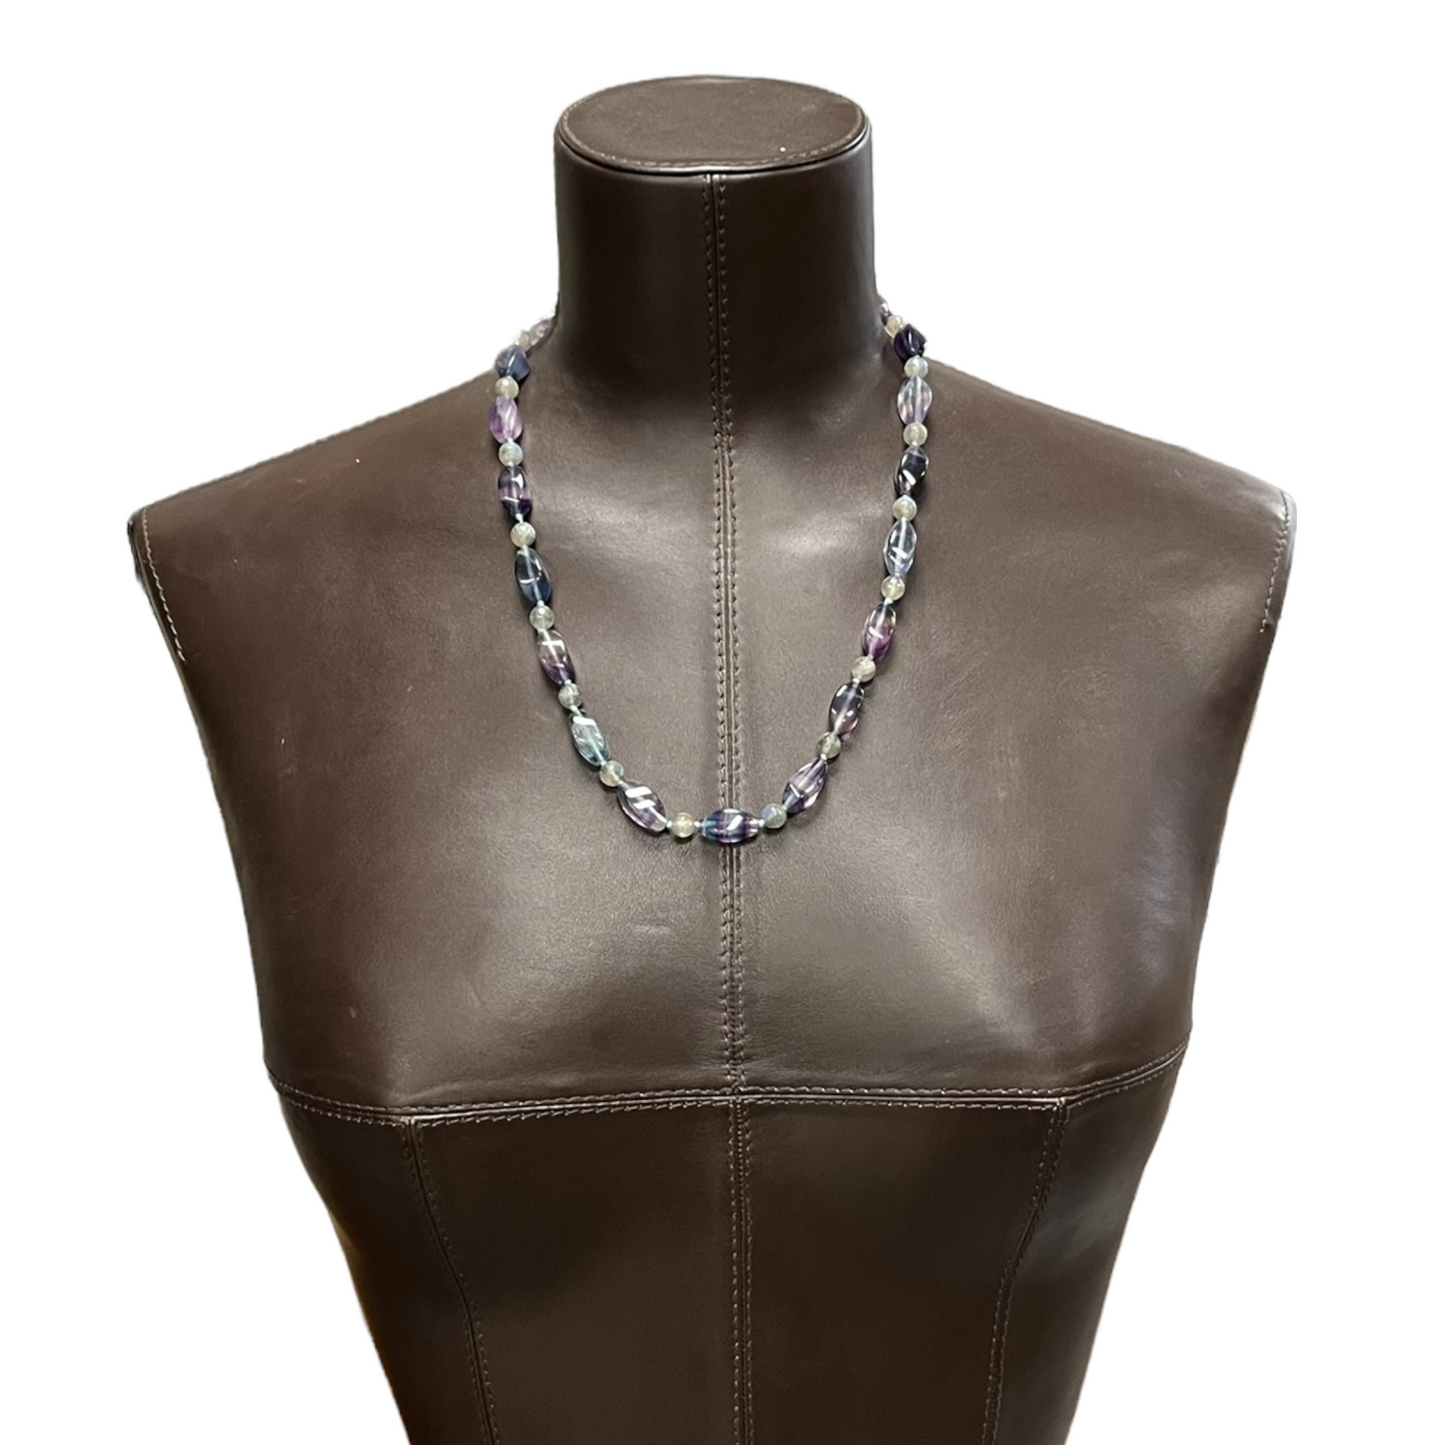 Natural stone knotted necklace (fluorite, labradorite) 53 cm